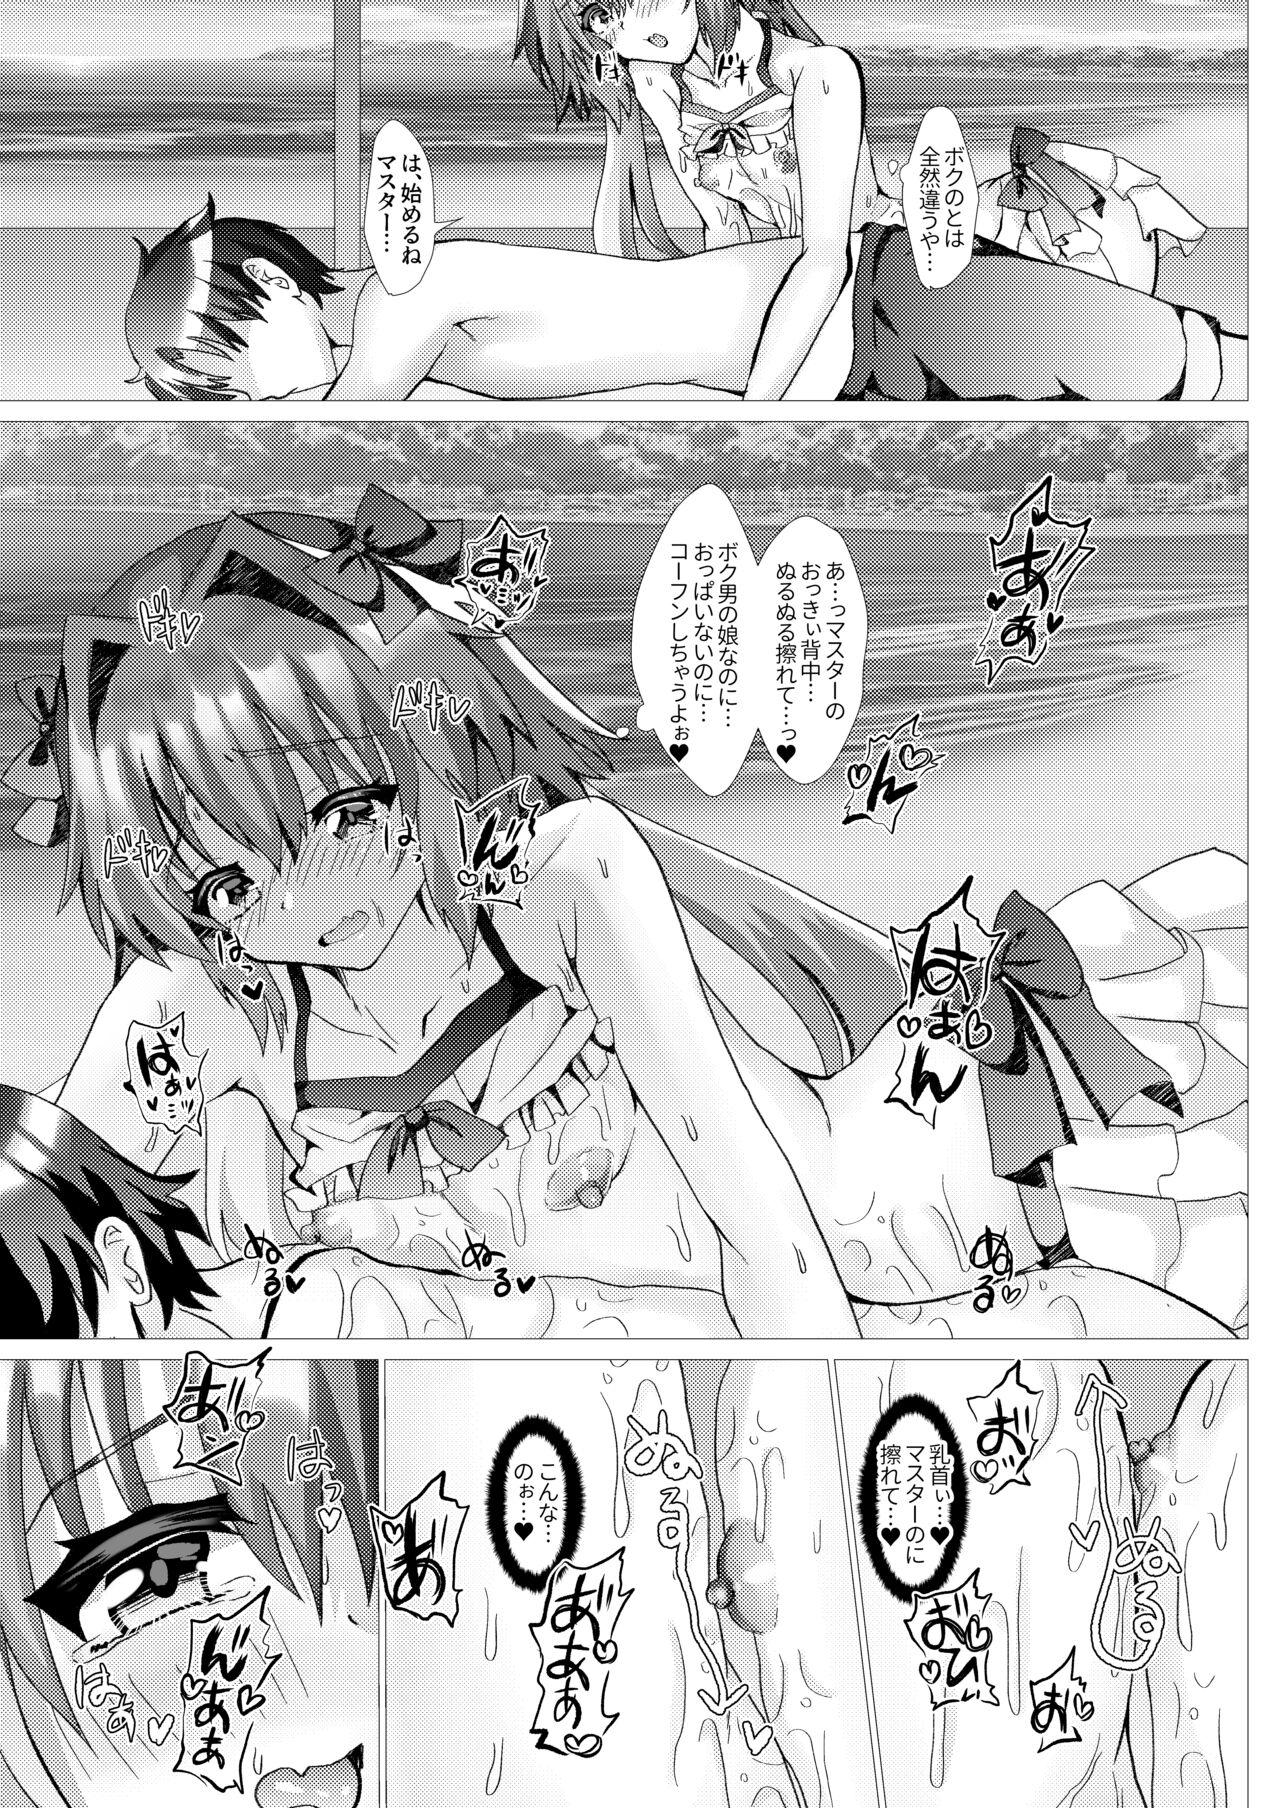 Pasivo Astolfo to Summer Vacation + Omake - Fate grand order Cumshot - Page 6